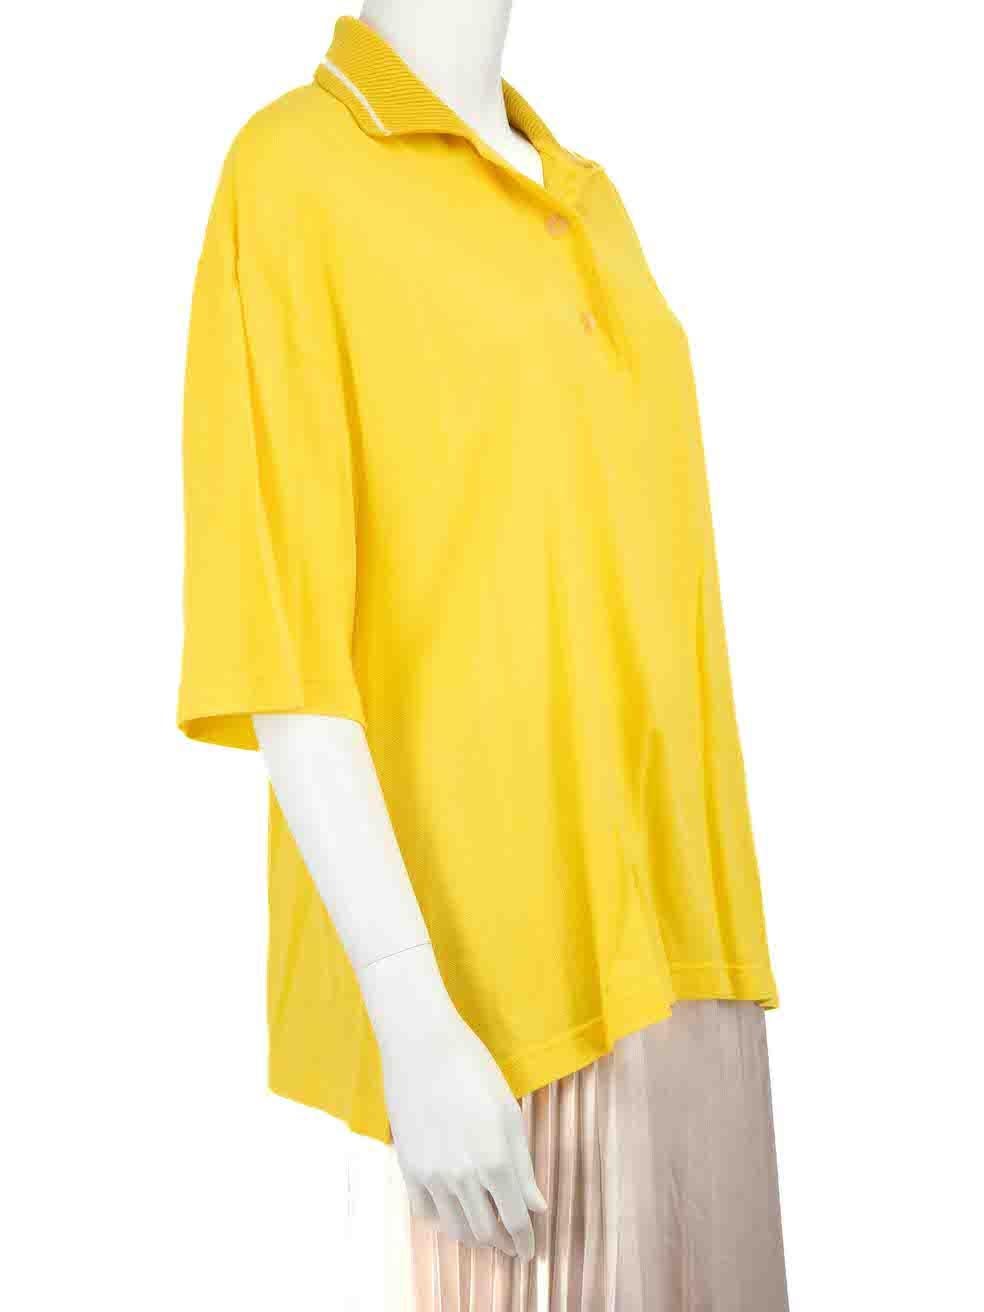 CONDITION is Good. Minor wear to shirt is evident. Light wear to the fabric surface with a handful of small discoloured marks found through the front of this used Loewe designer resale item.
 
 Details
 Yellow
 Cotton
 Polo shirt
 Short sleeves
